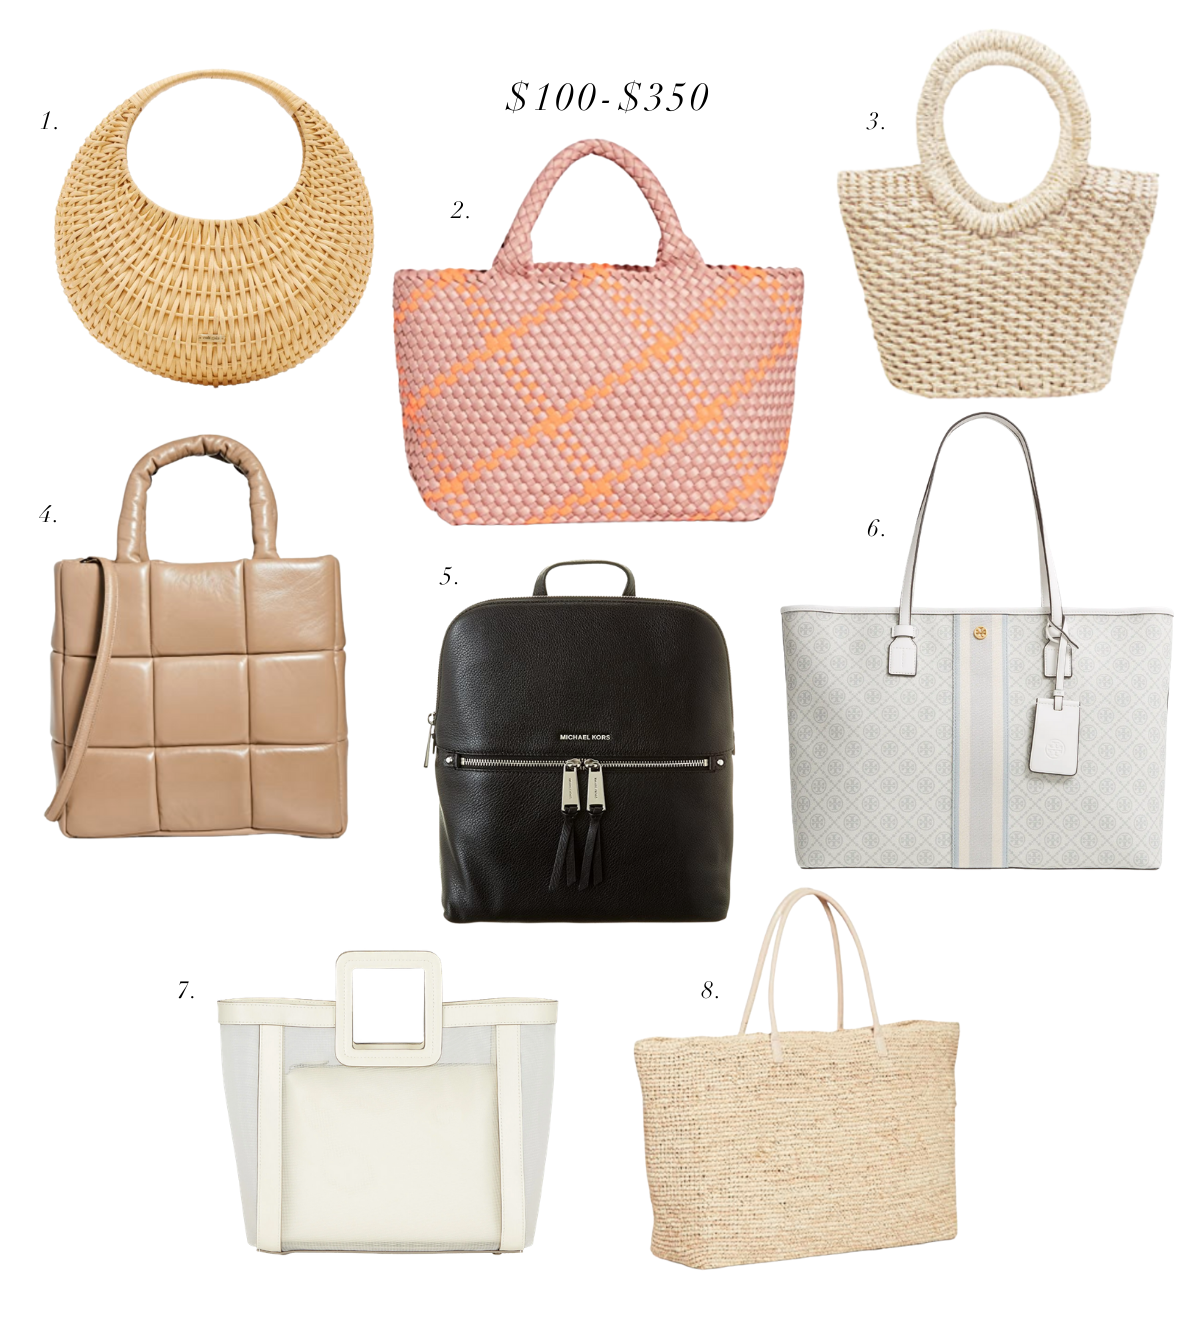 My 2021 Spring Bag Edit for Every Budget – Rachel Parcell, Inc.